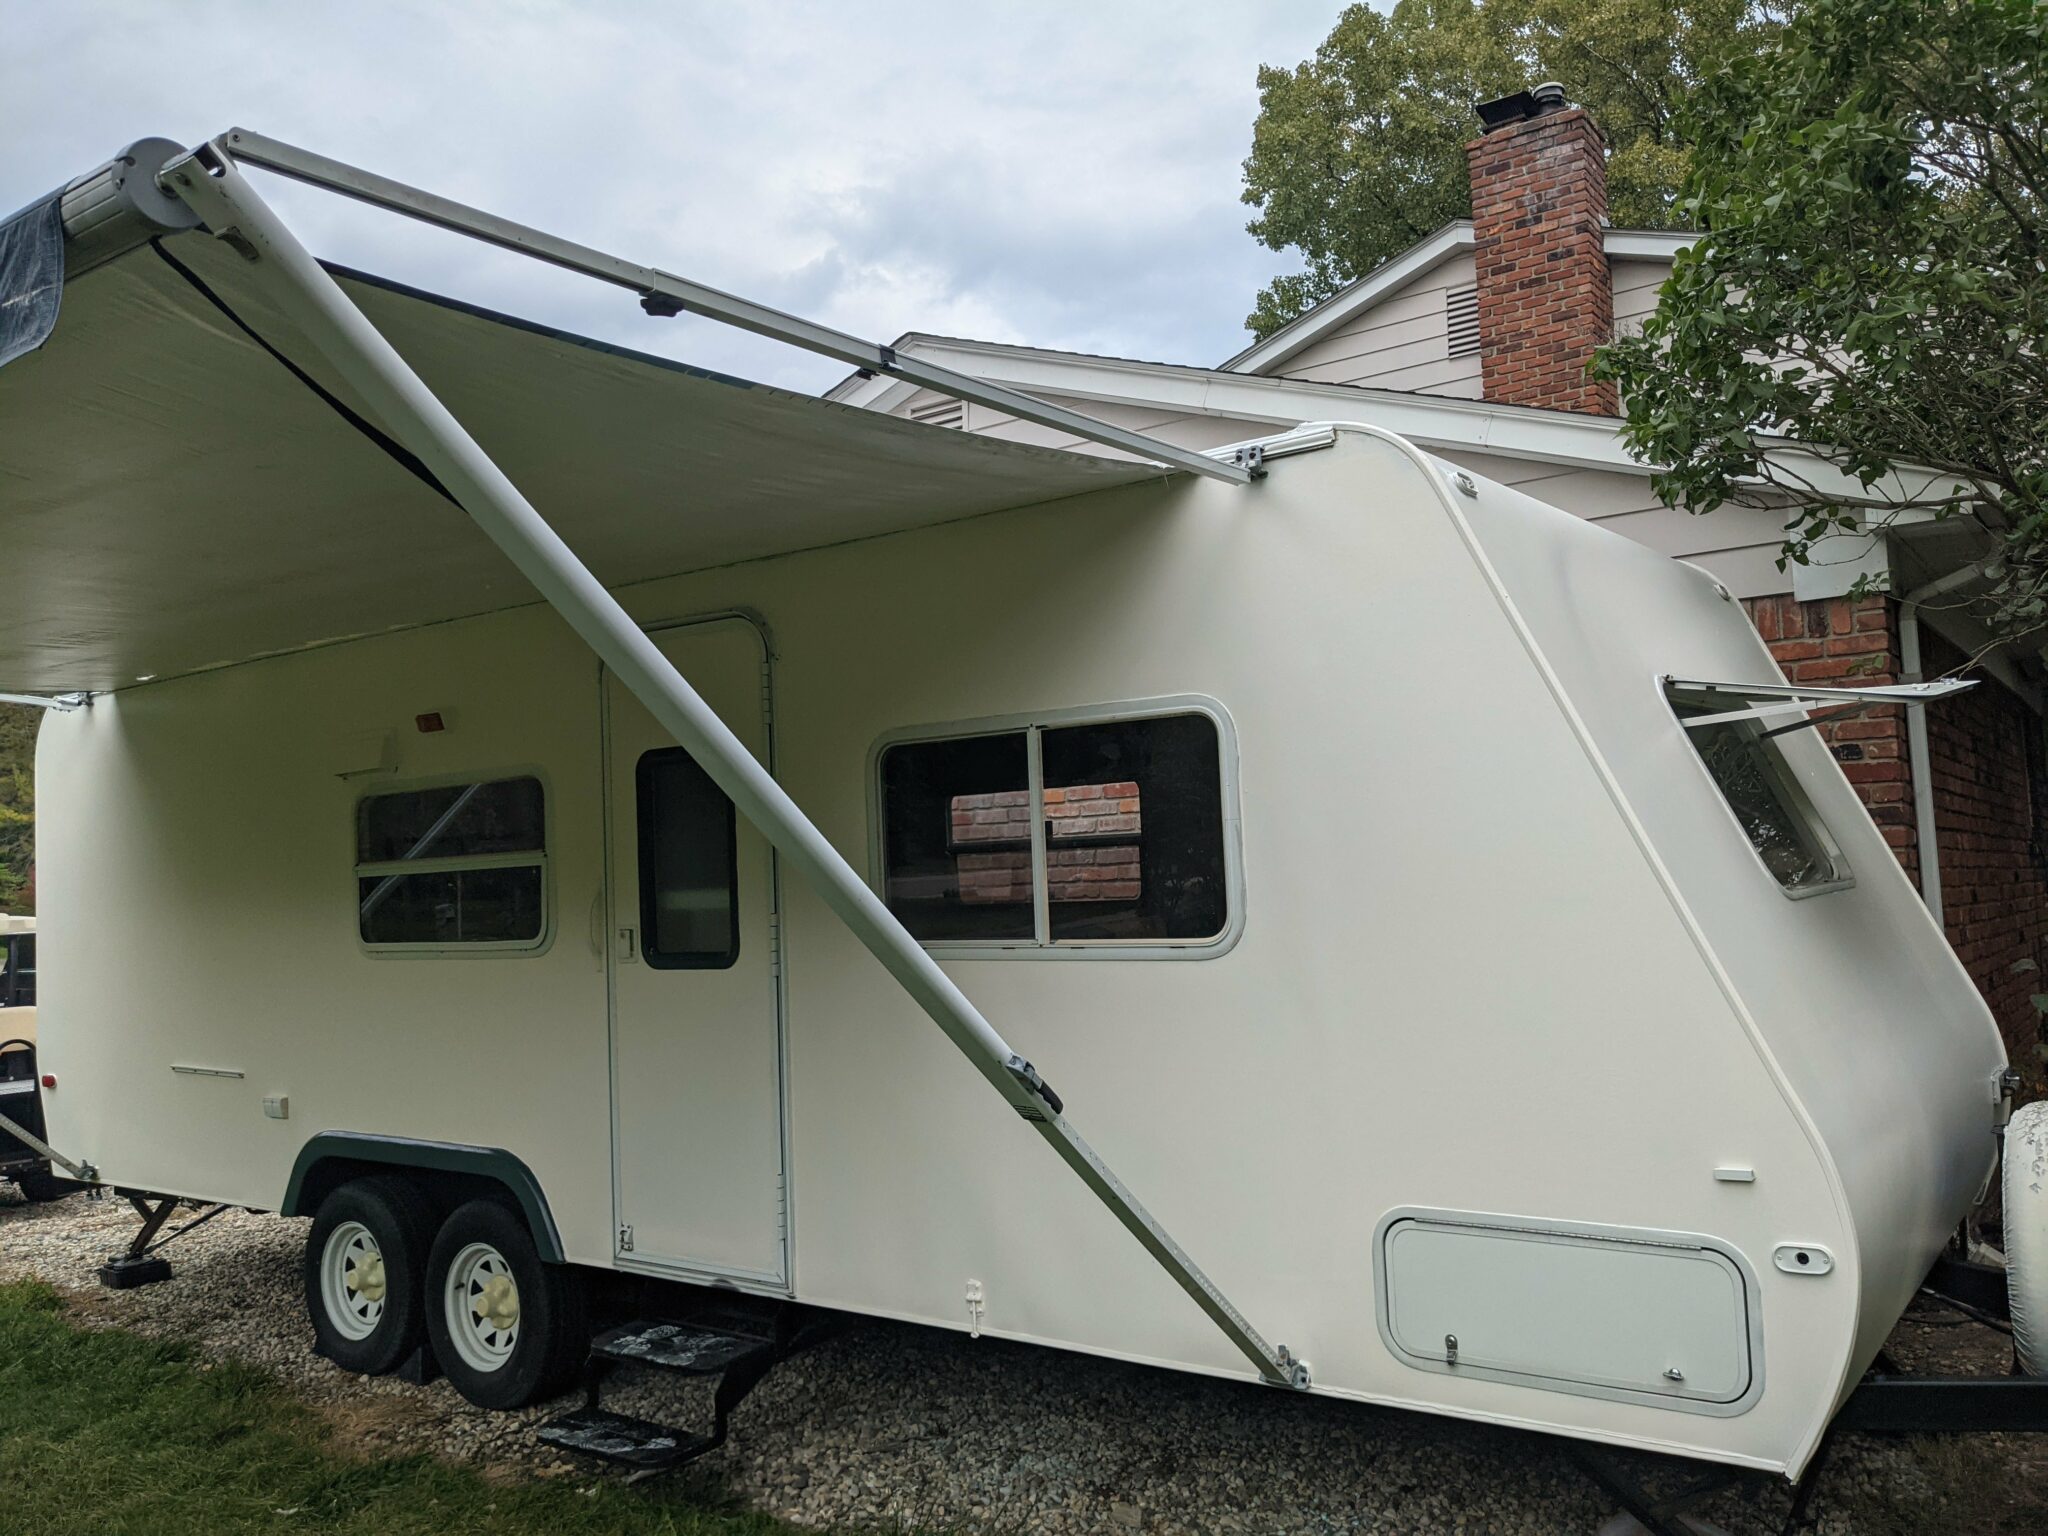 Renovation Progress and Sources for the Trail Cruiser RV All Things with Purpose Sarah Lemp 2